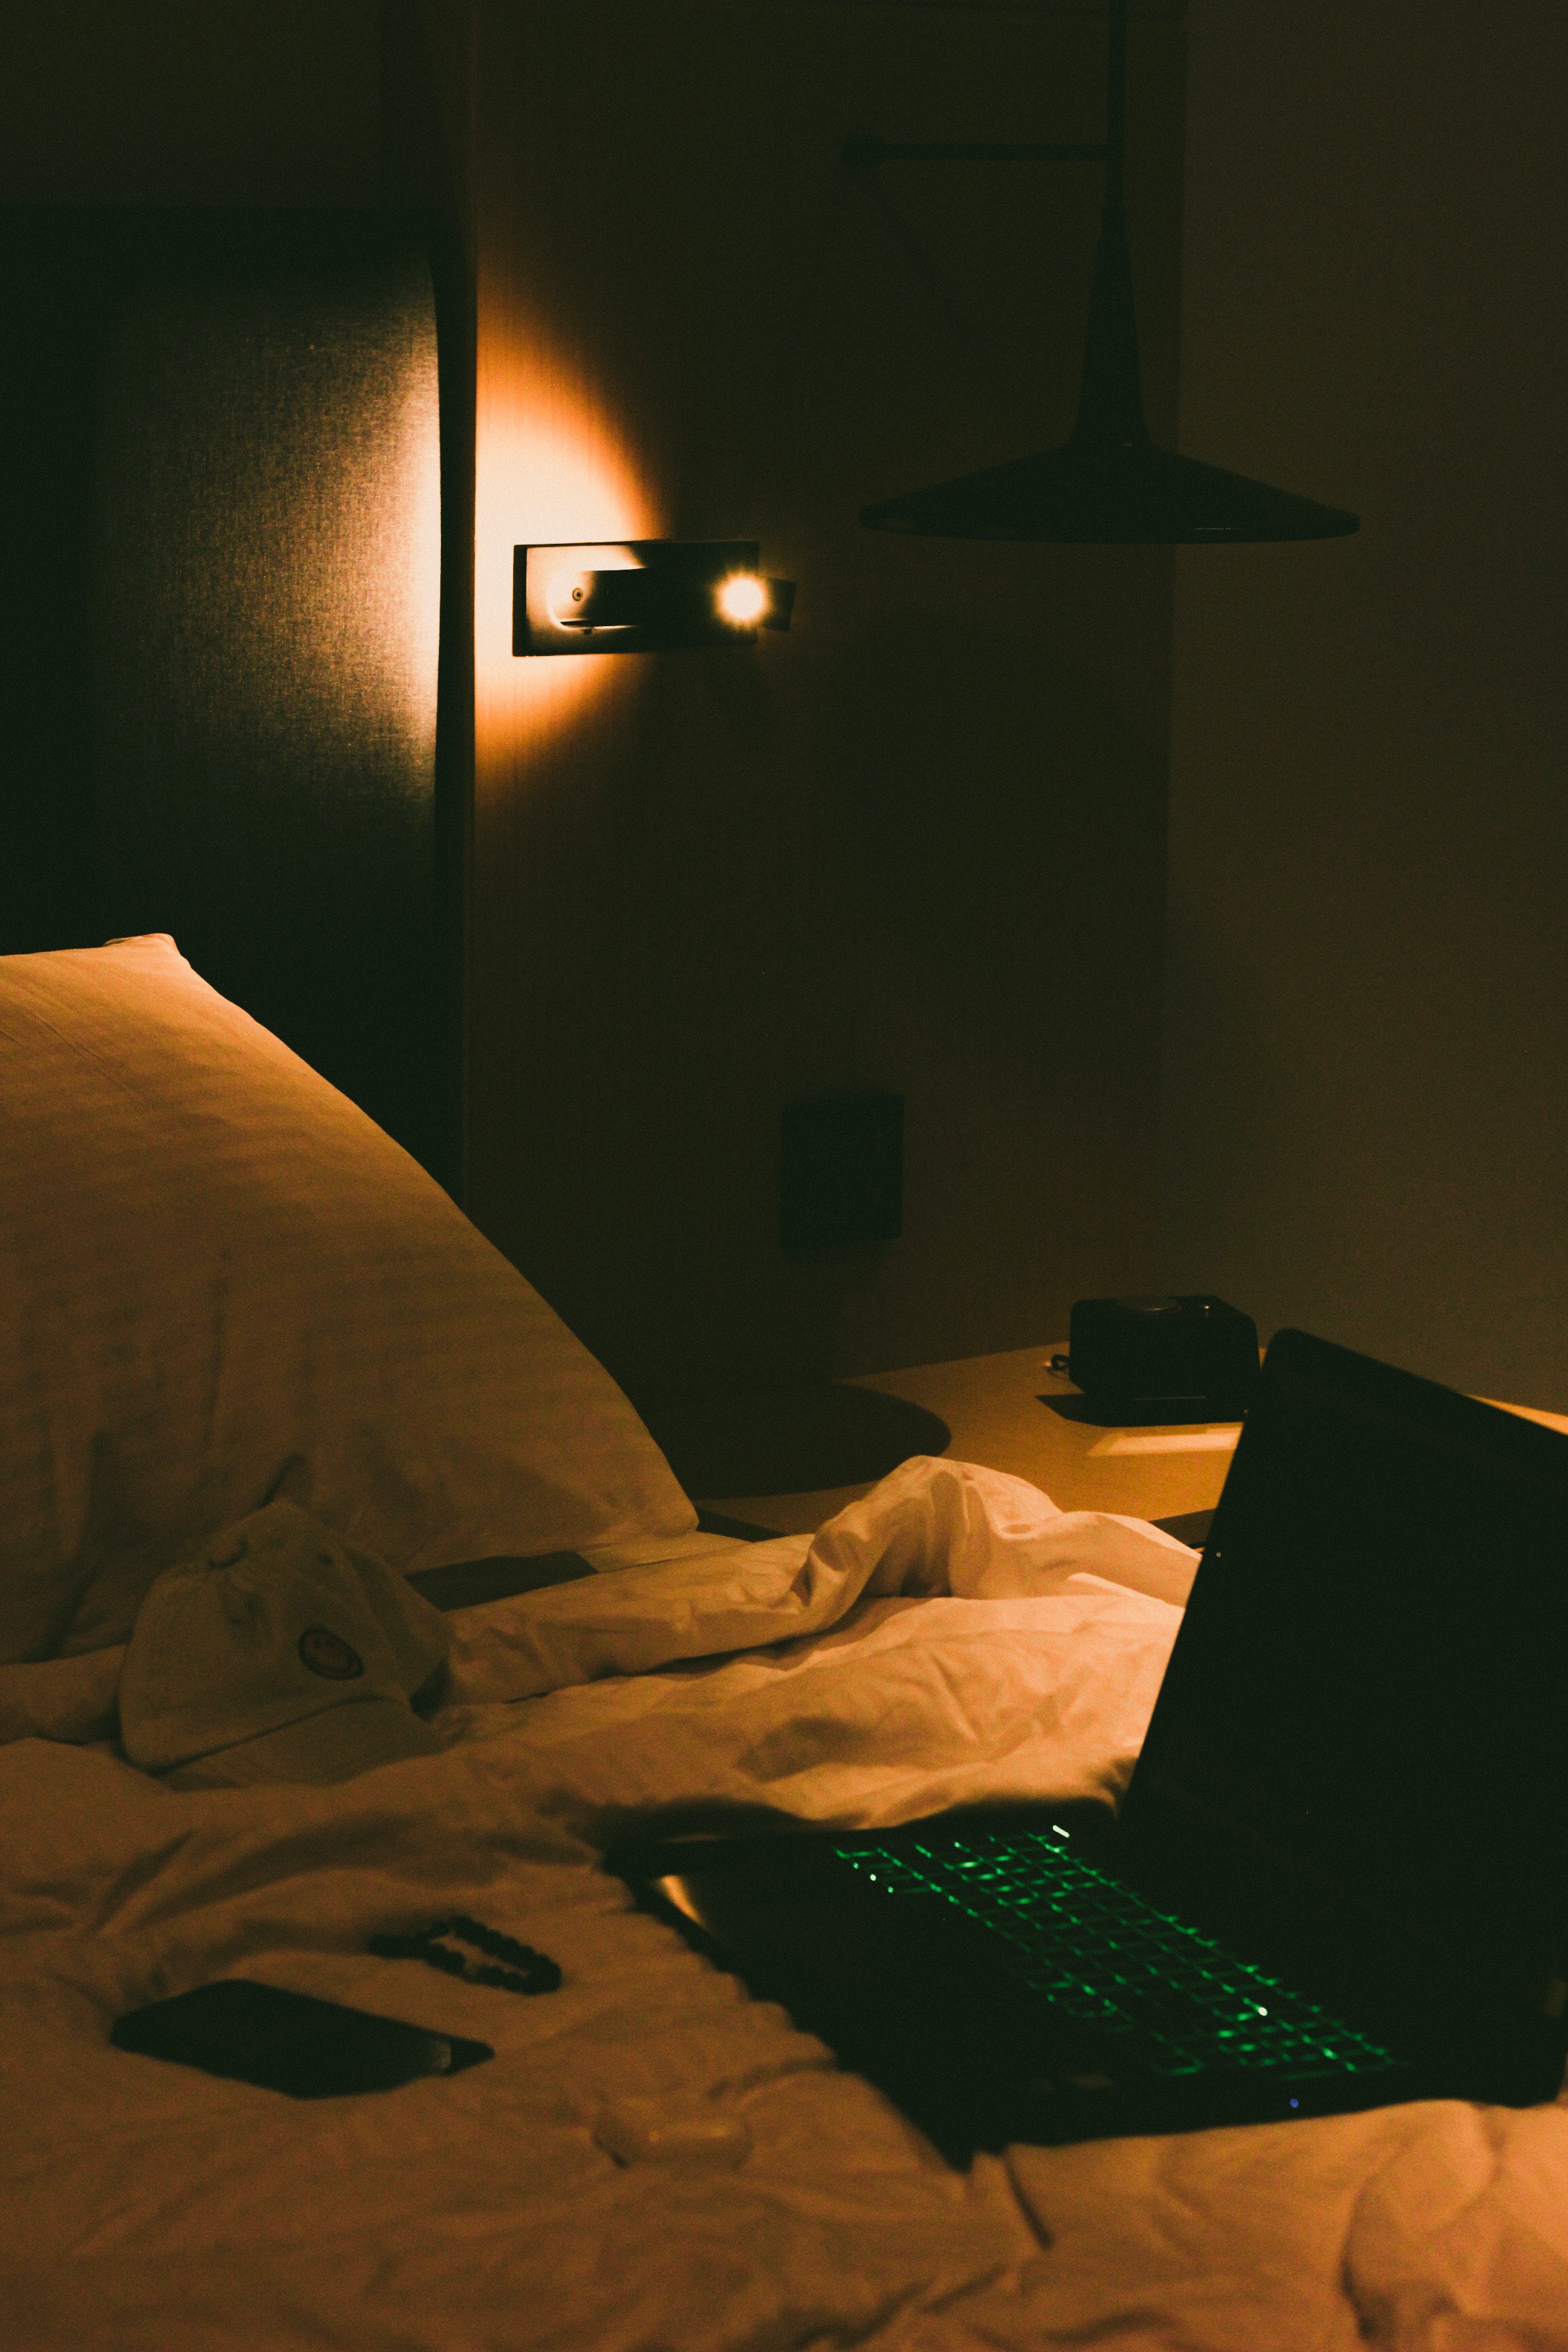 A bed with a laptop, a cup, and a cell phone on it. - Dark